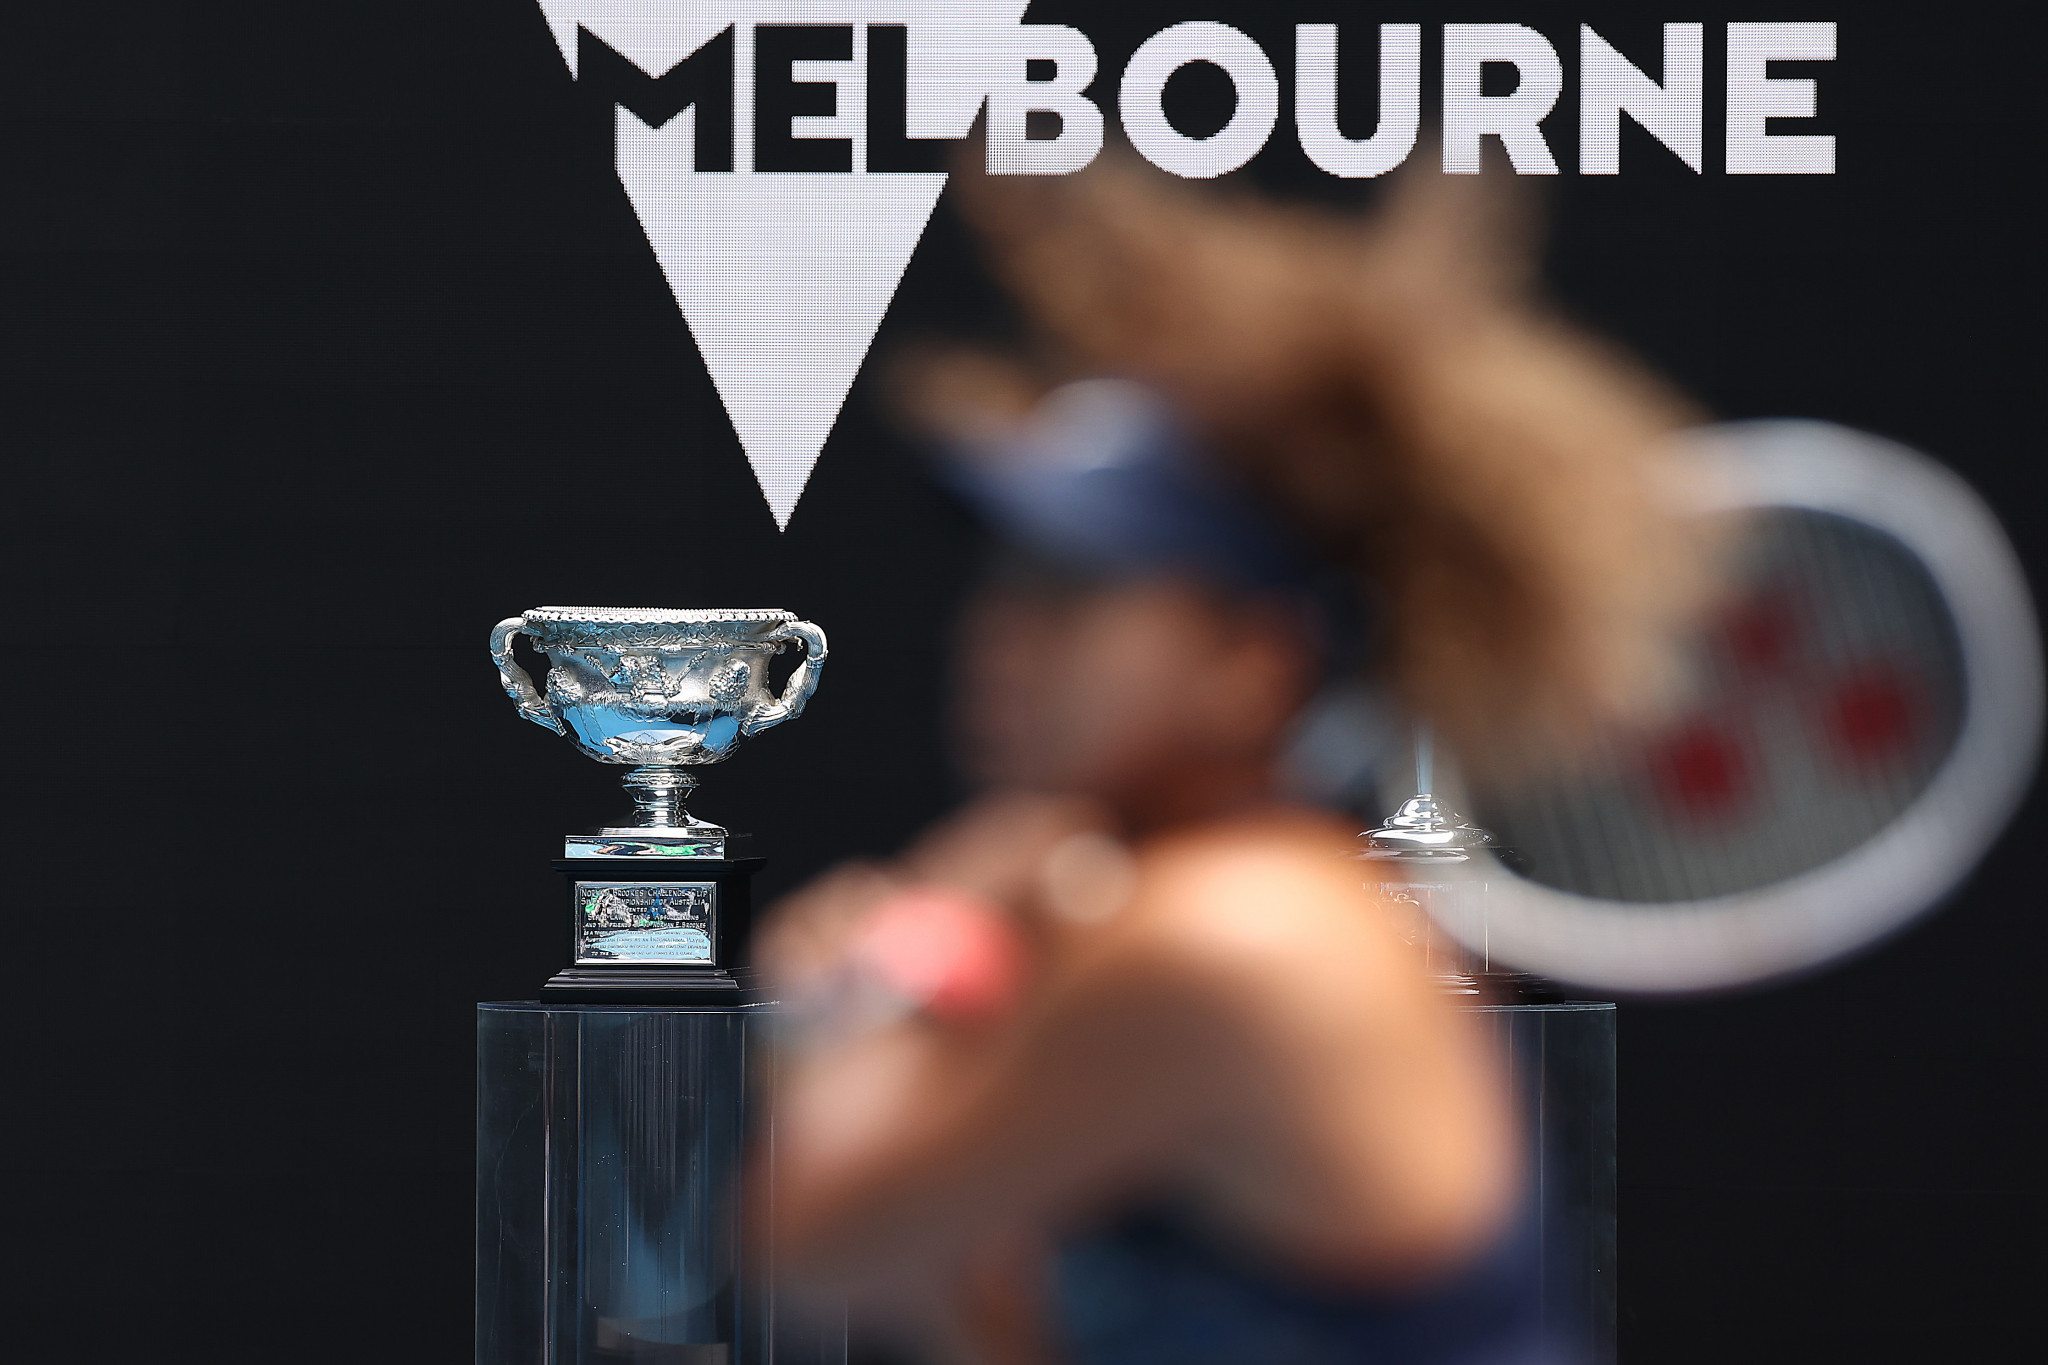 Osaka previously won the Australian Open in 2019 ©Getty Images